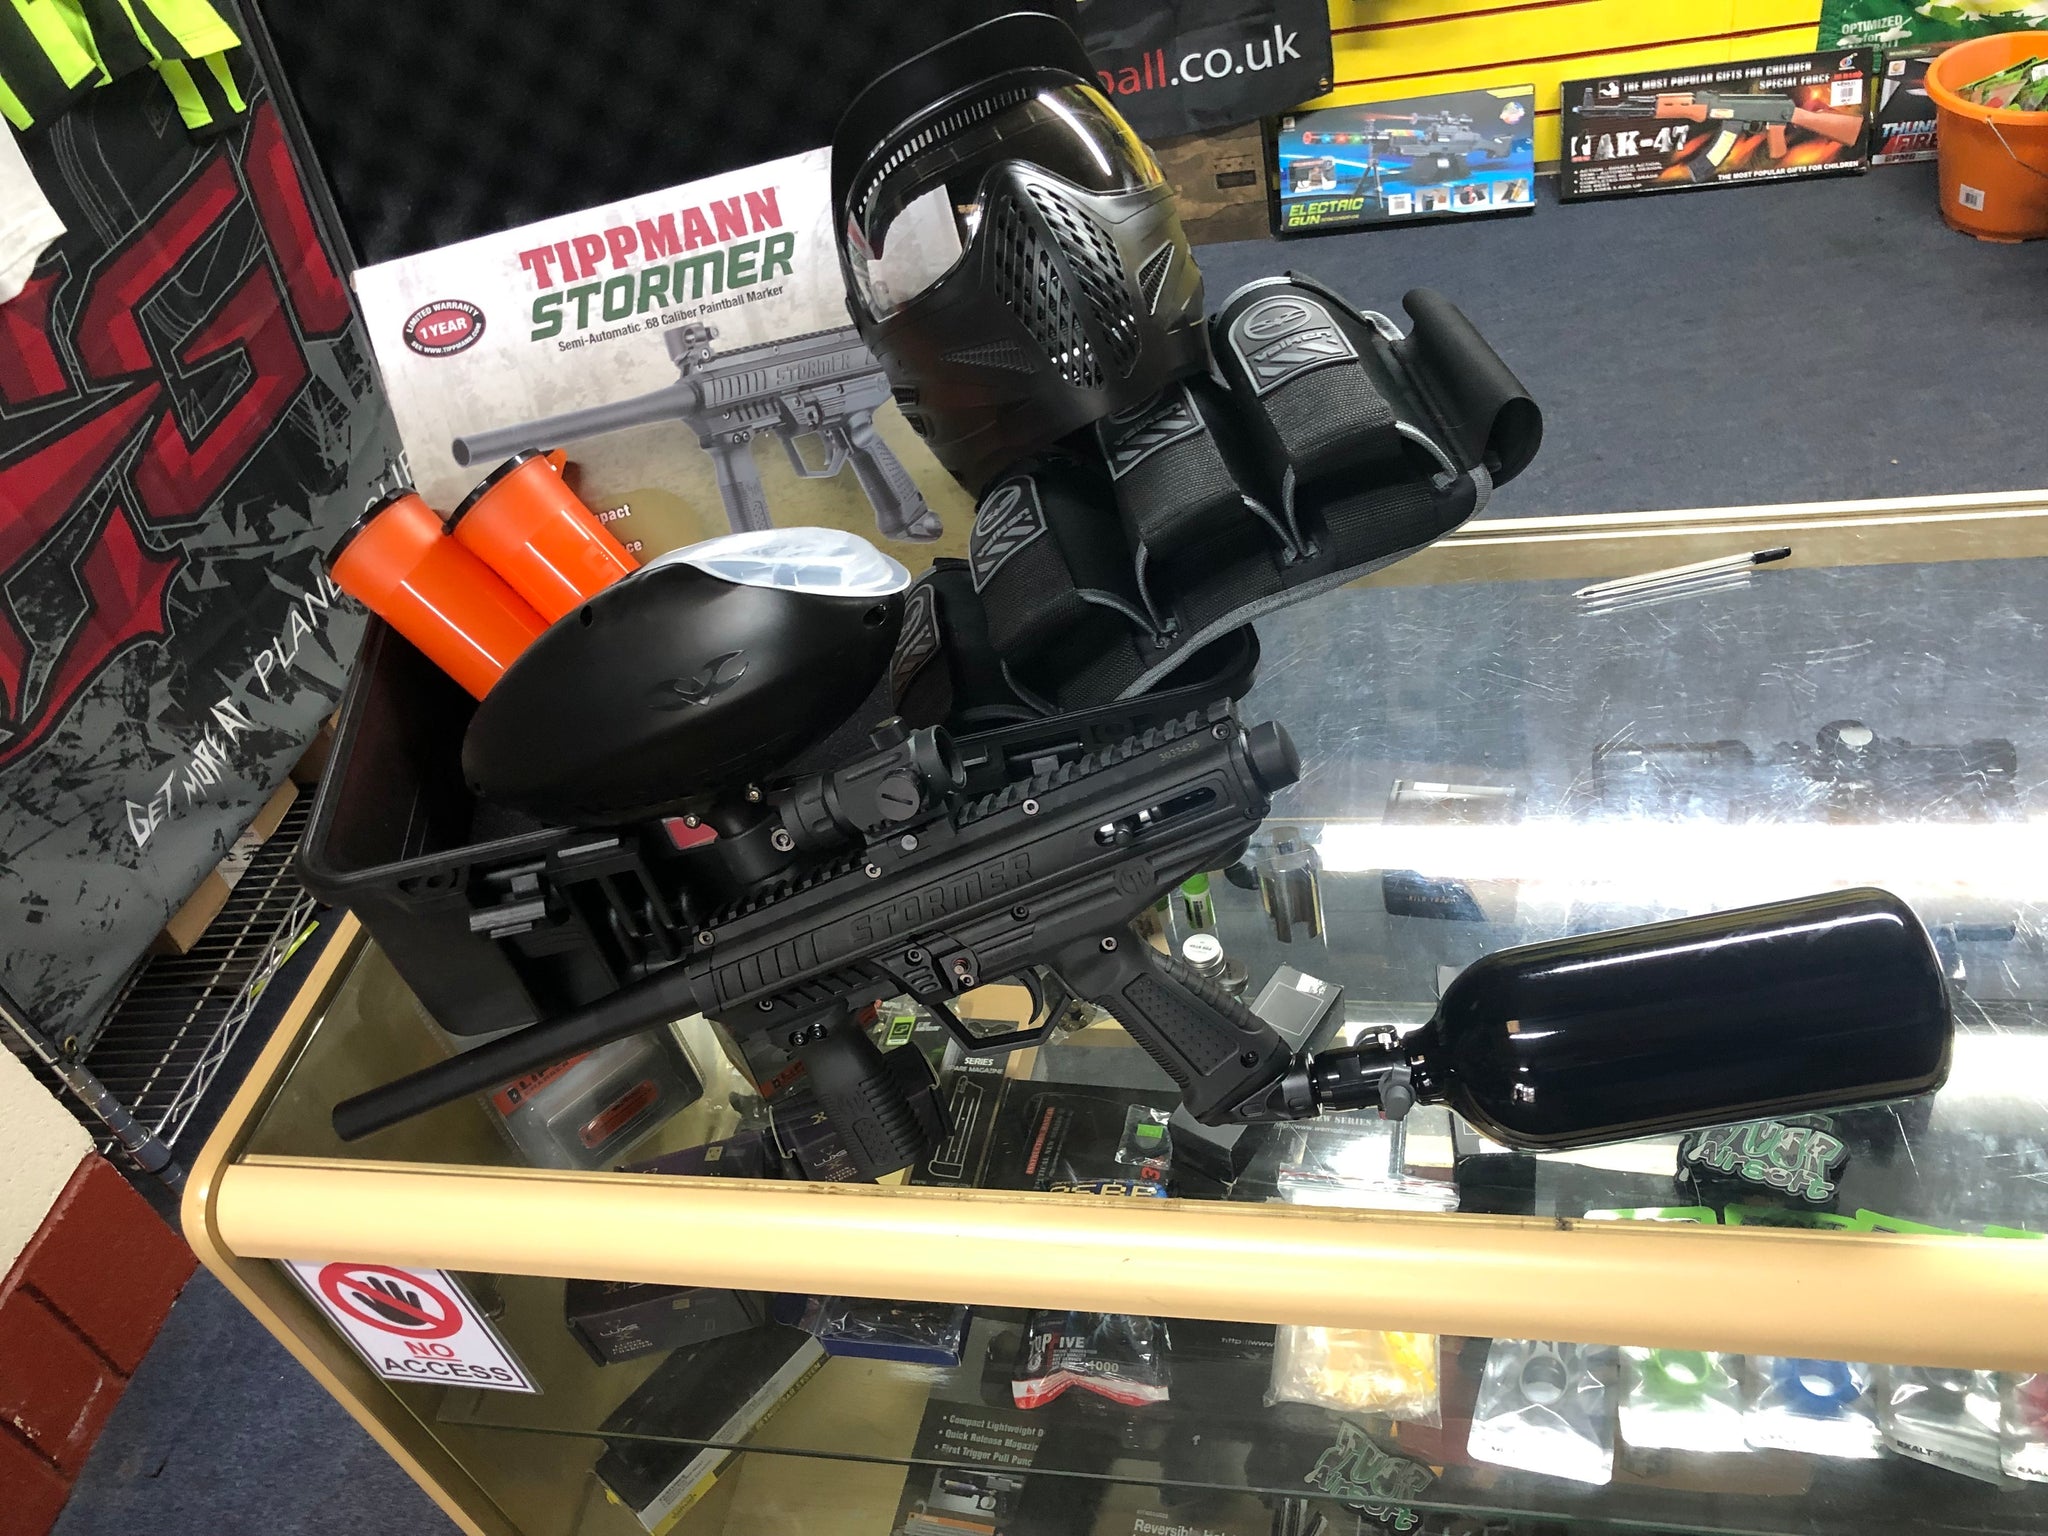 Tippmann Stormer Ready To Play Package